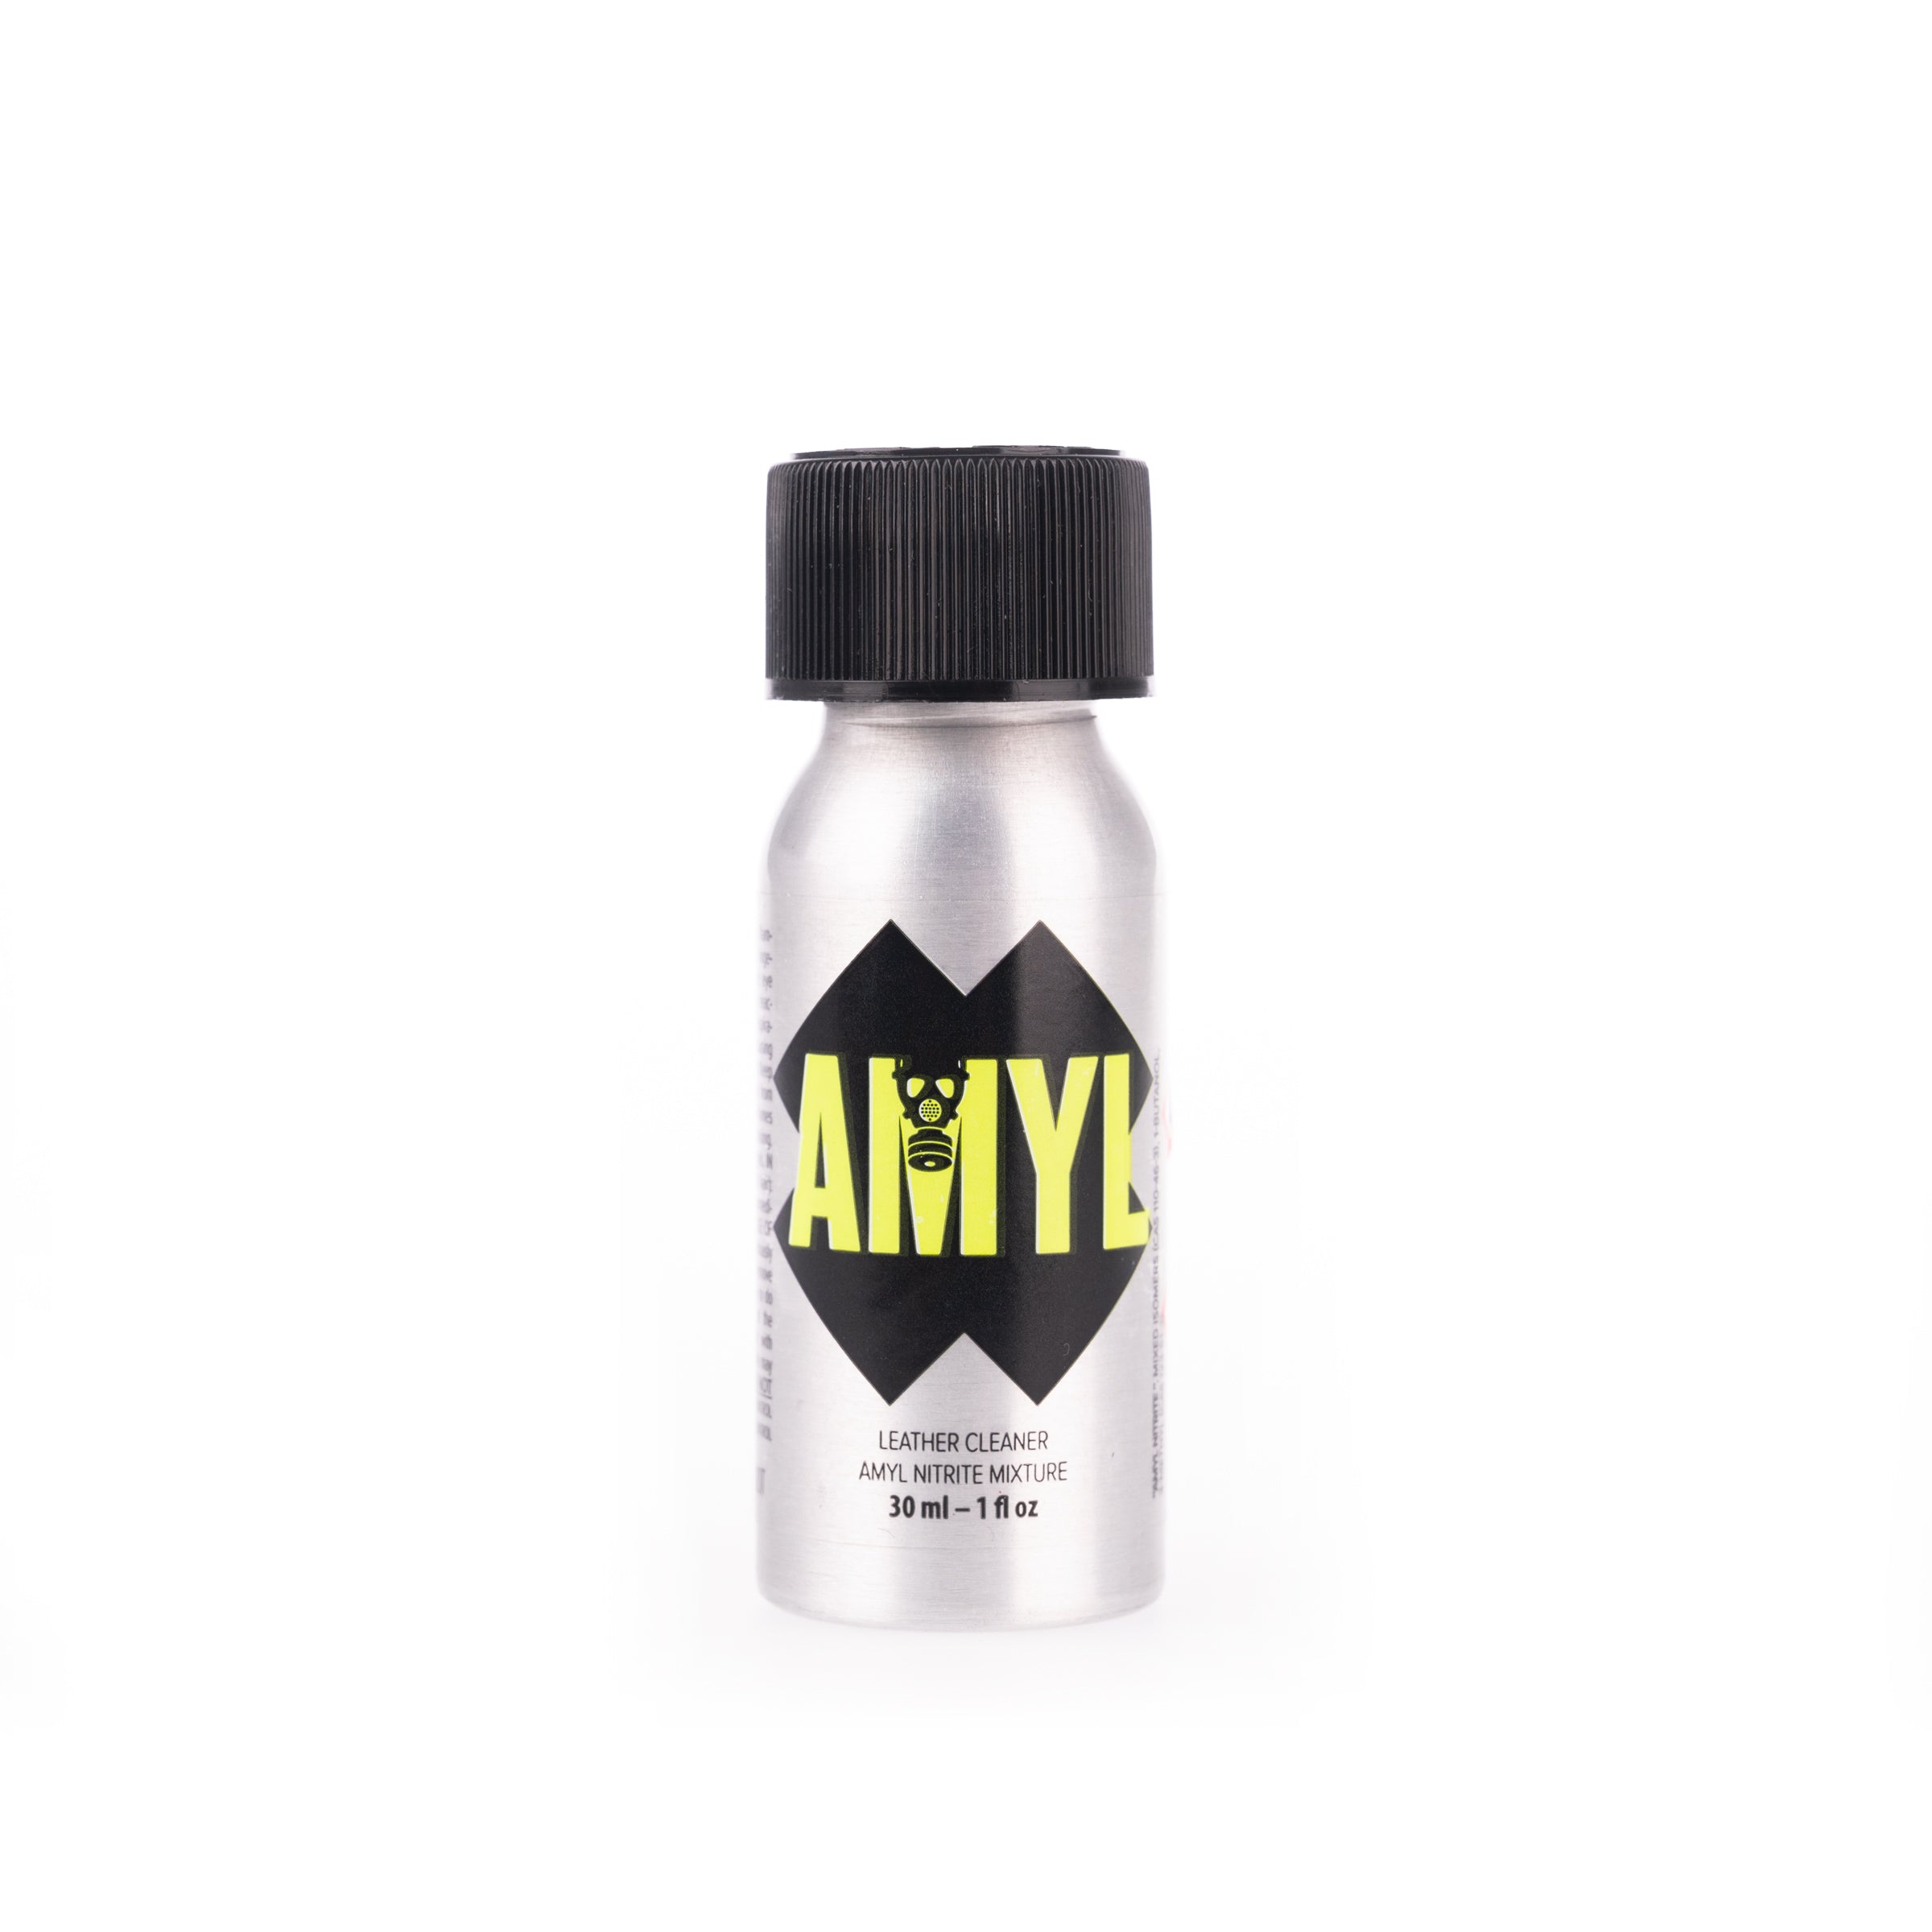 AMYL METAL 24ml, POPPERS UK, POPPERS USA, FREE DELIVERY, NEXT DAY DELIVERY